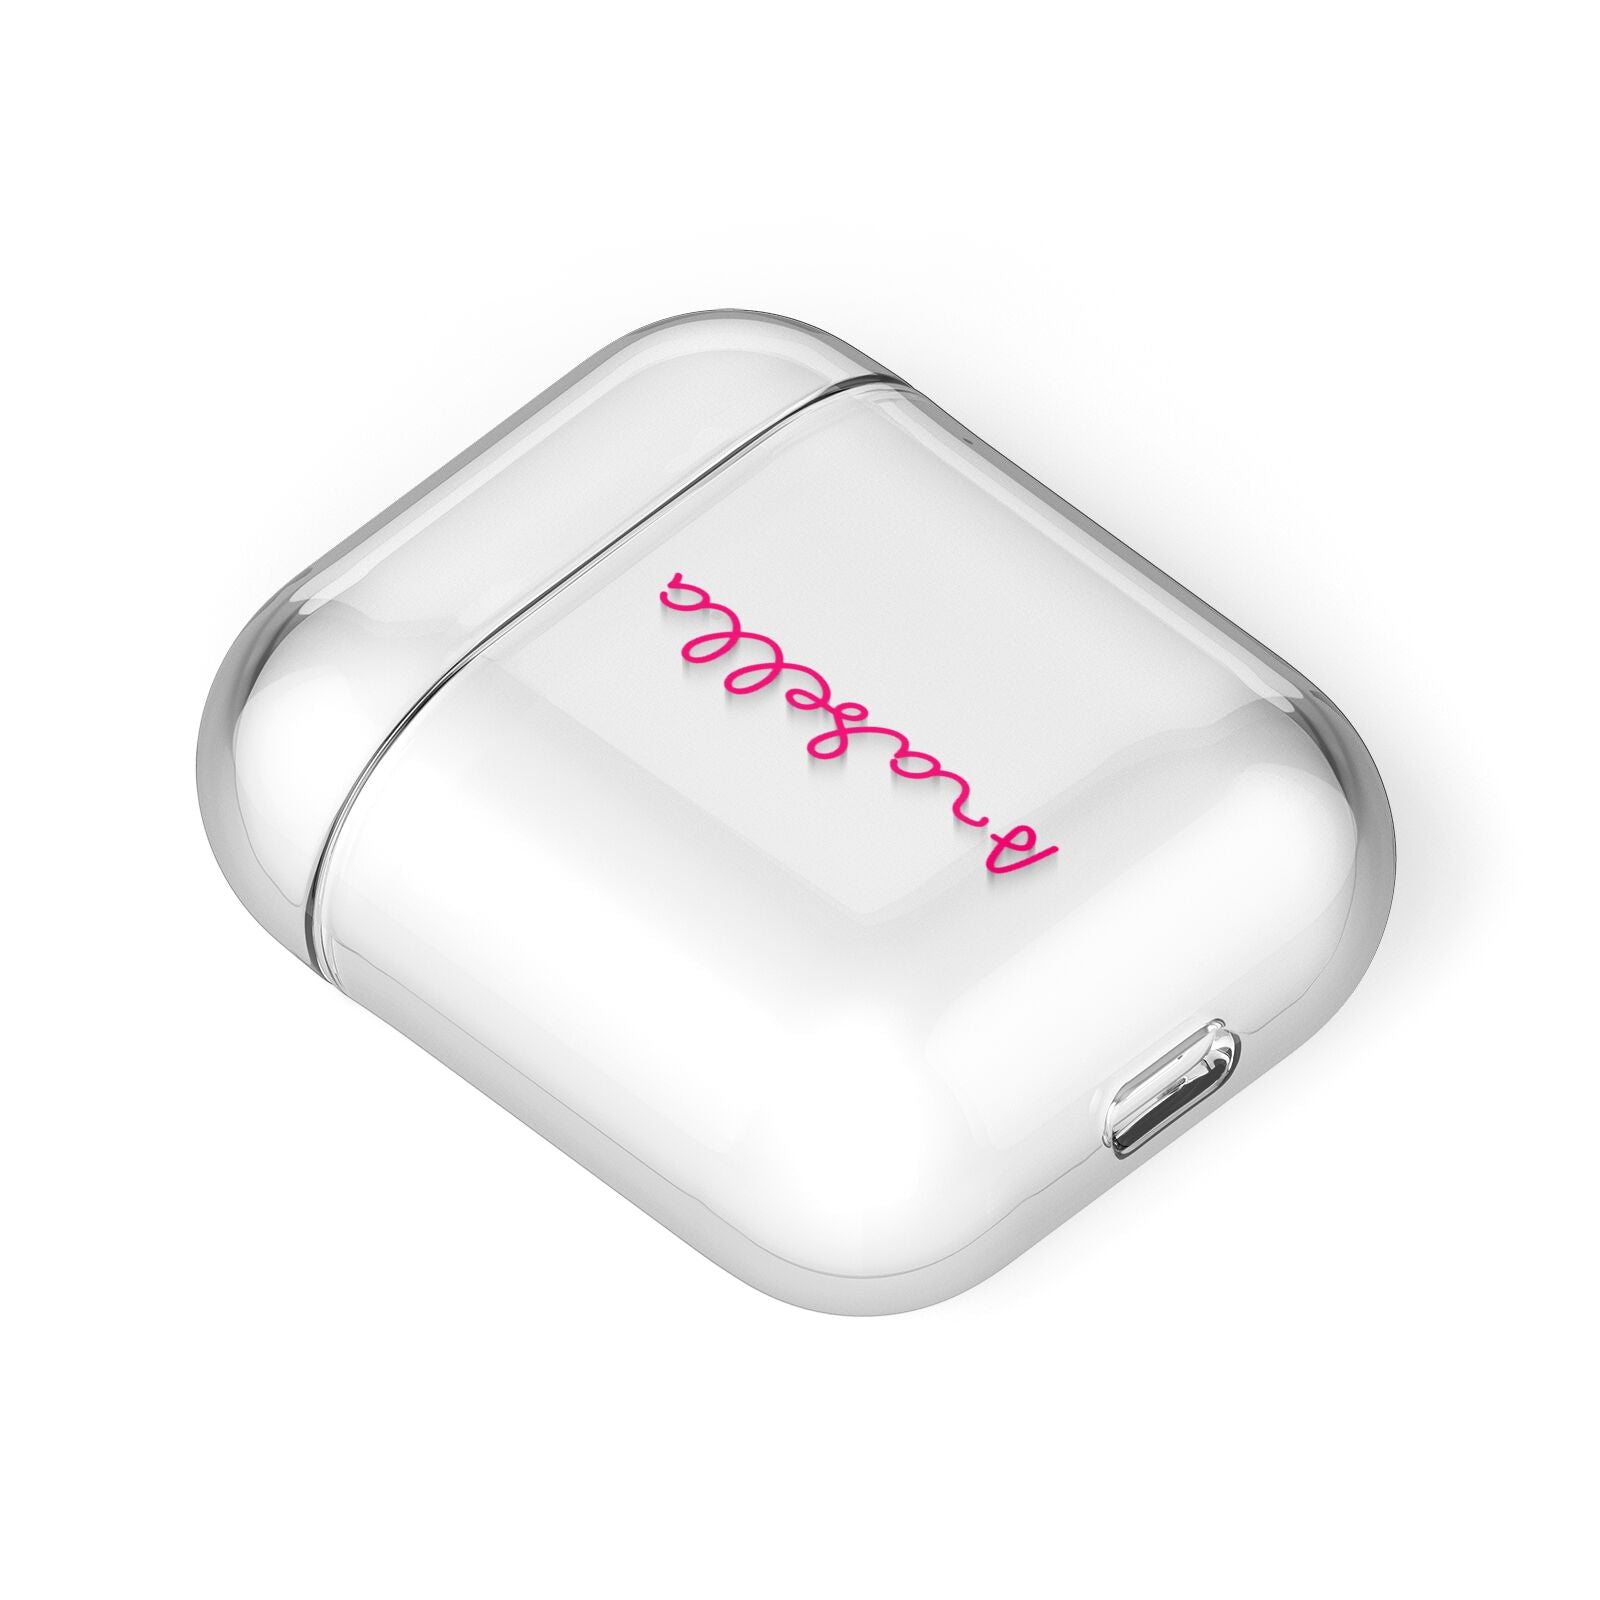 Summer Love AirPods Case Laid Flat